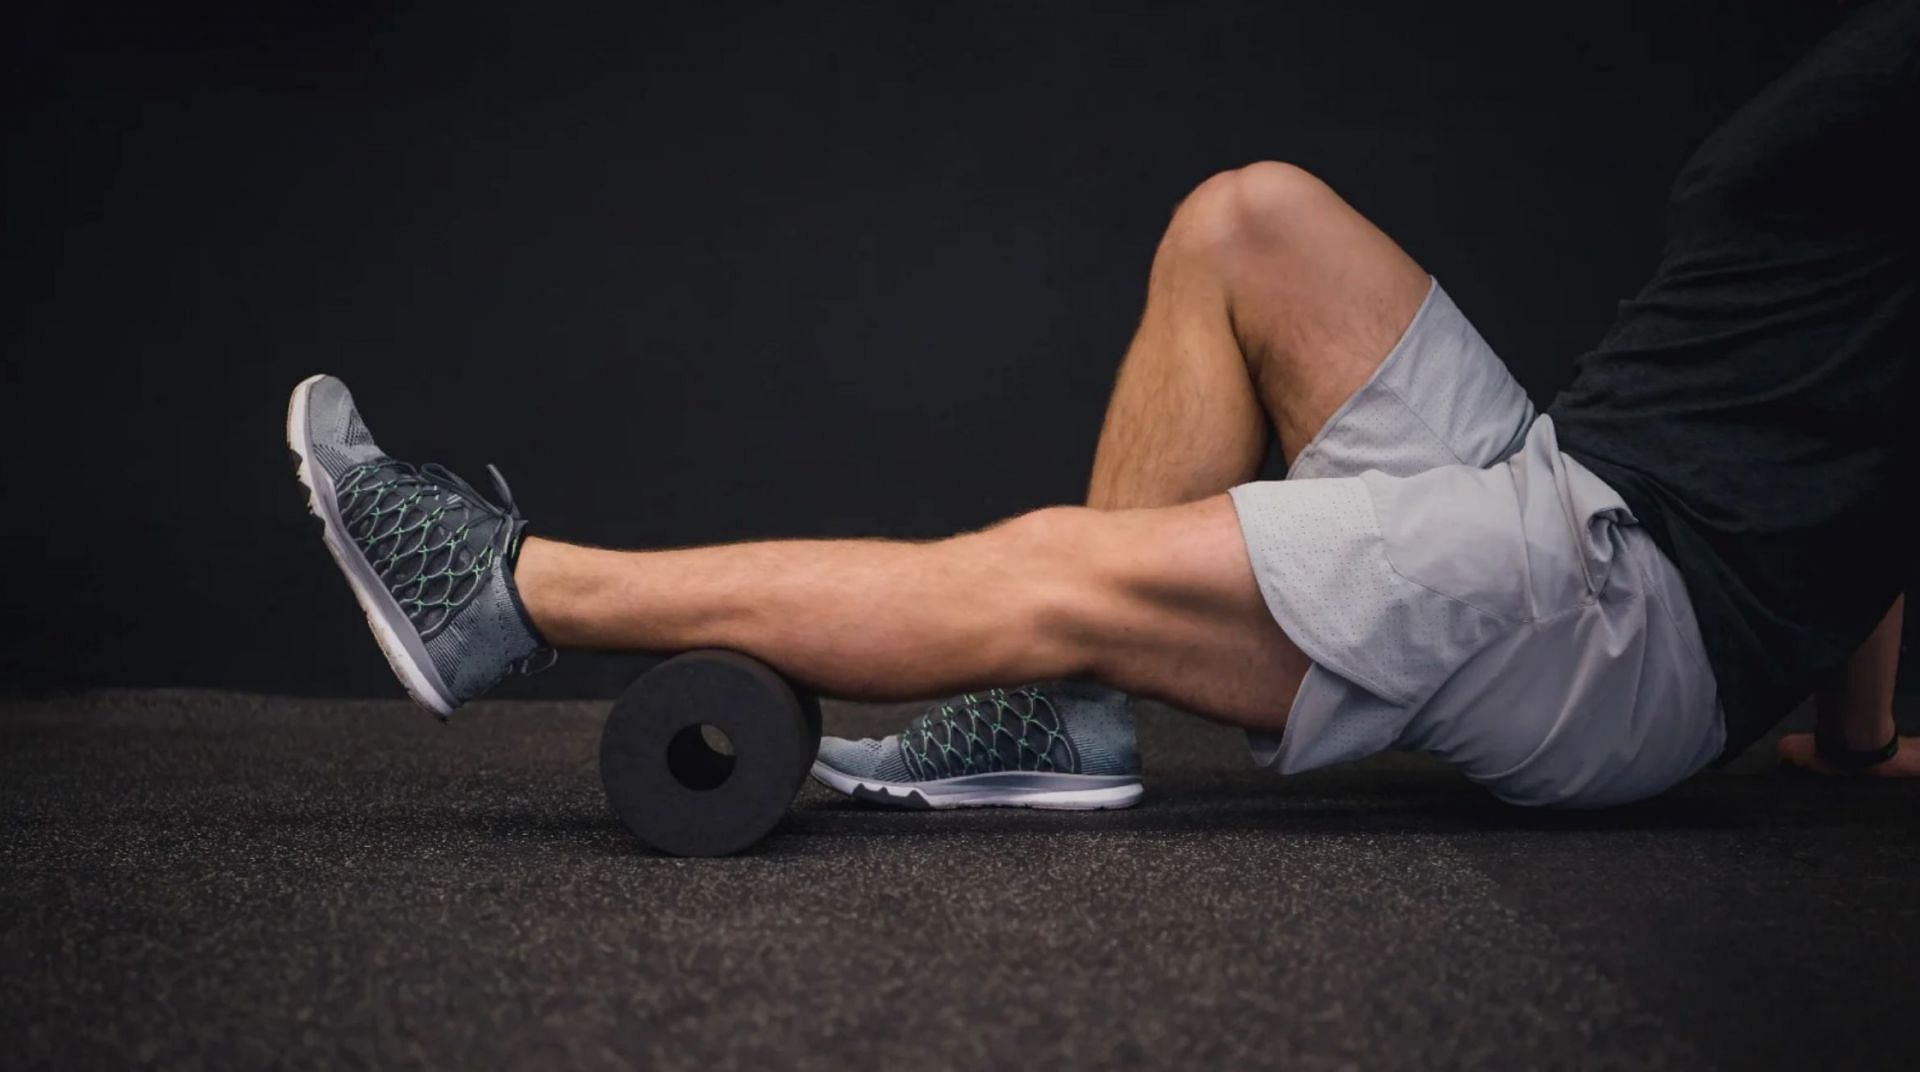 Try foam roller exercises to relieve lower back pain.